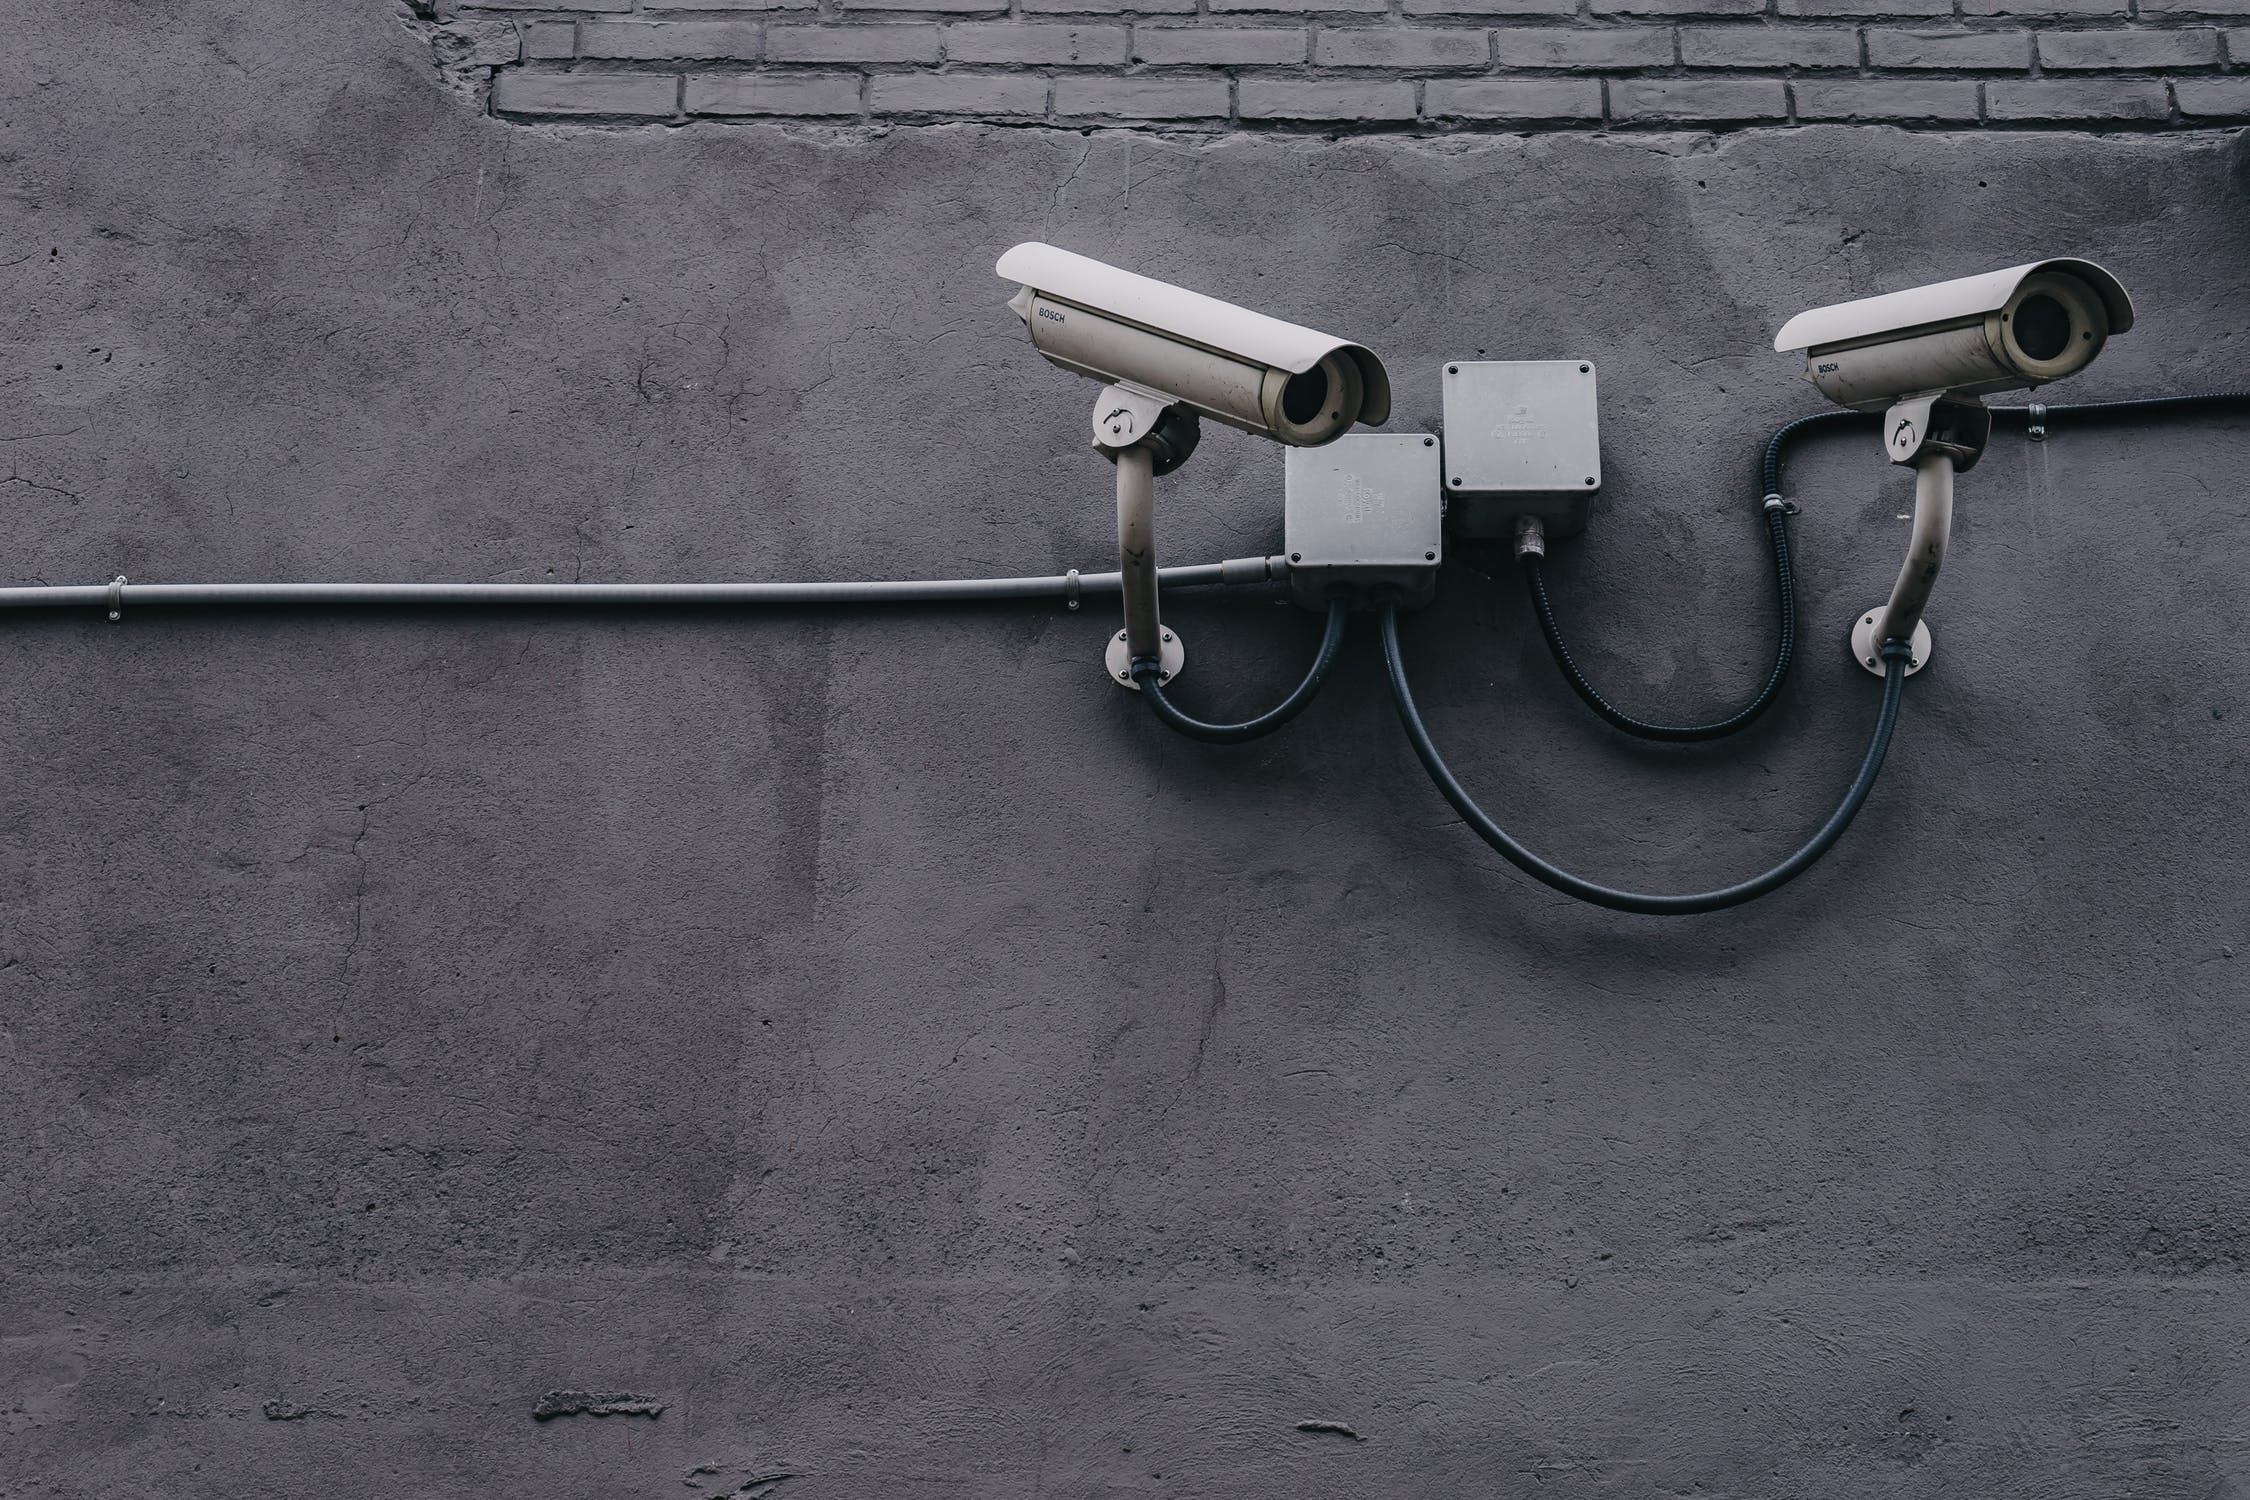 Federal Court Rules Security Cameras Can Monitor Your Home for 68 Days Without Notification